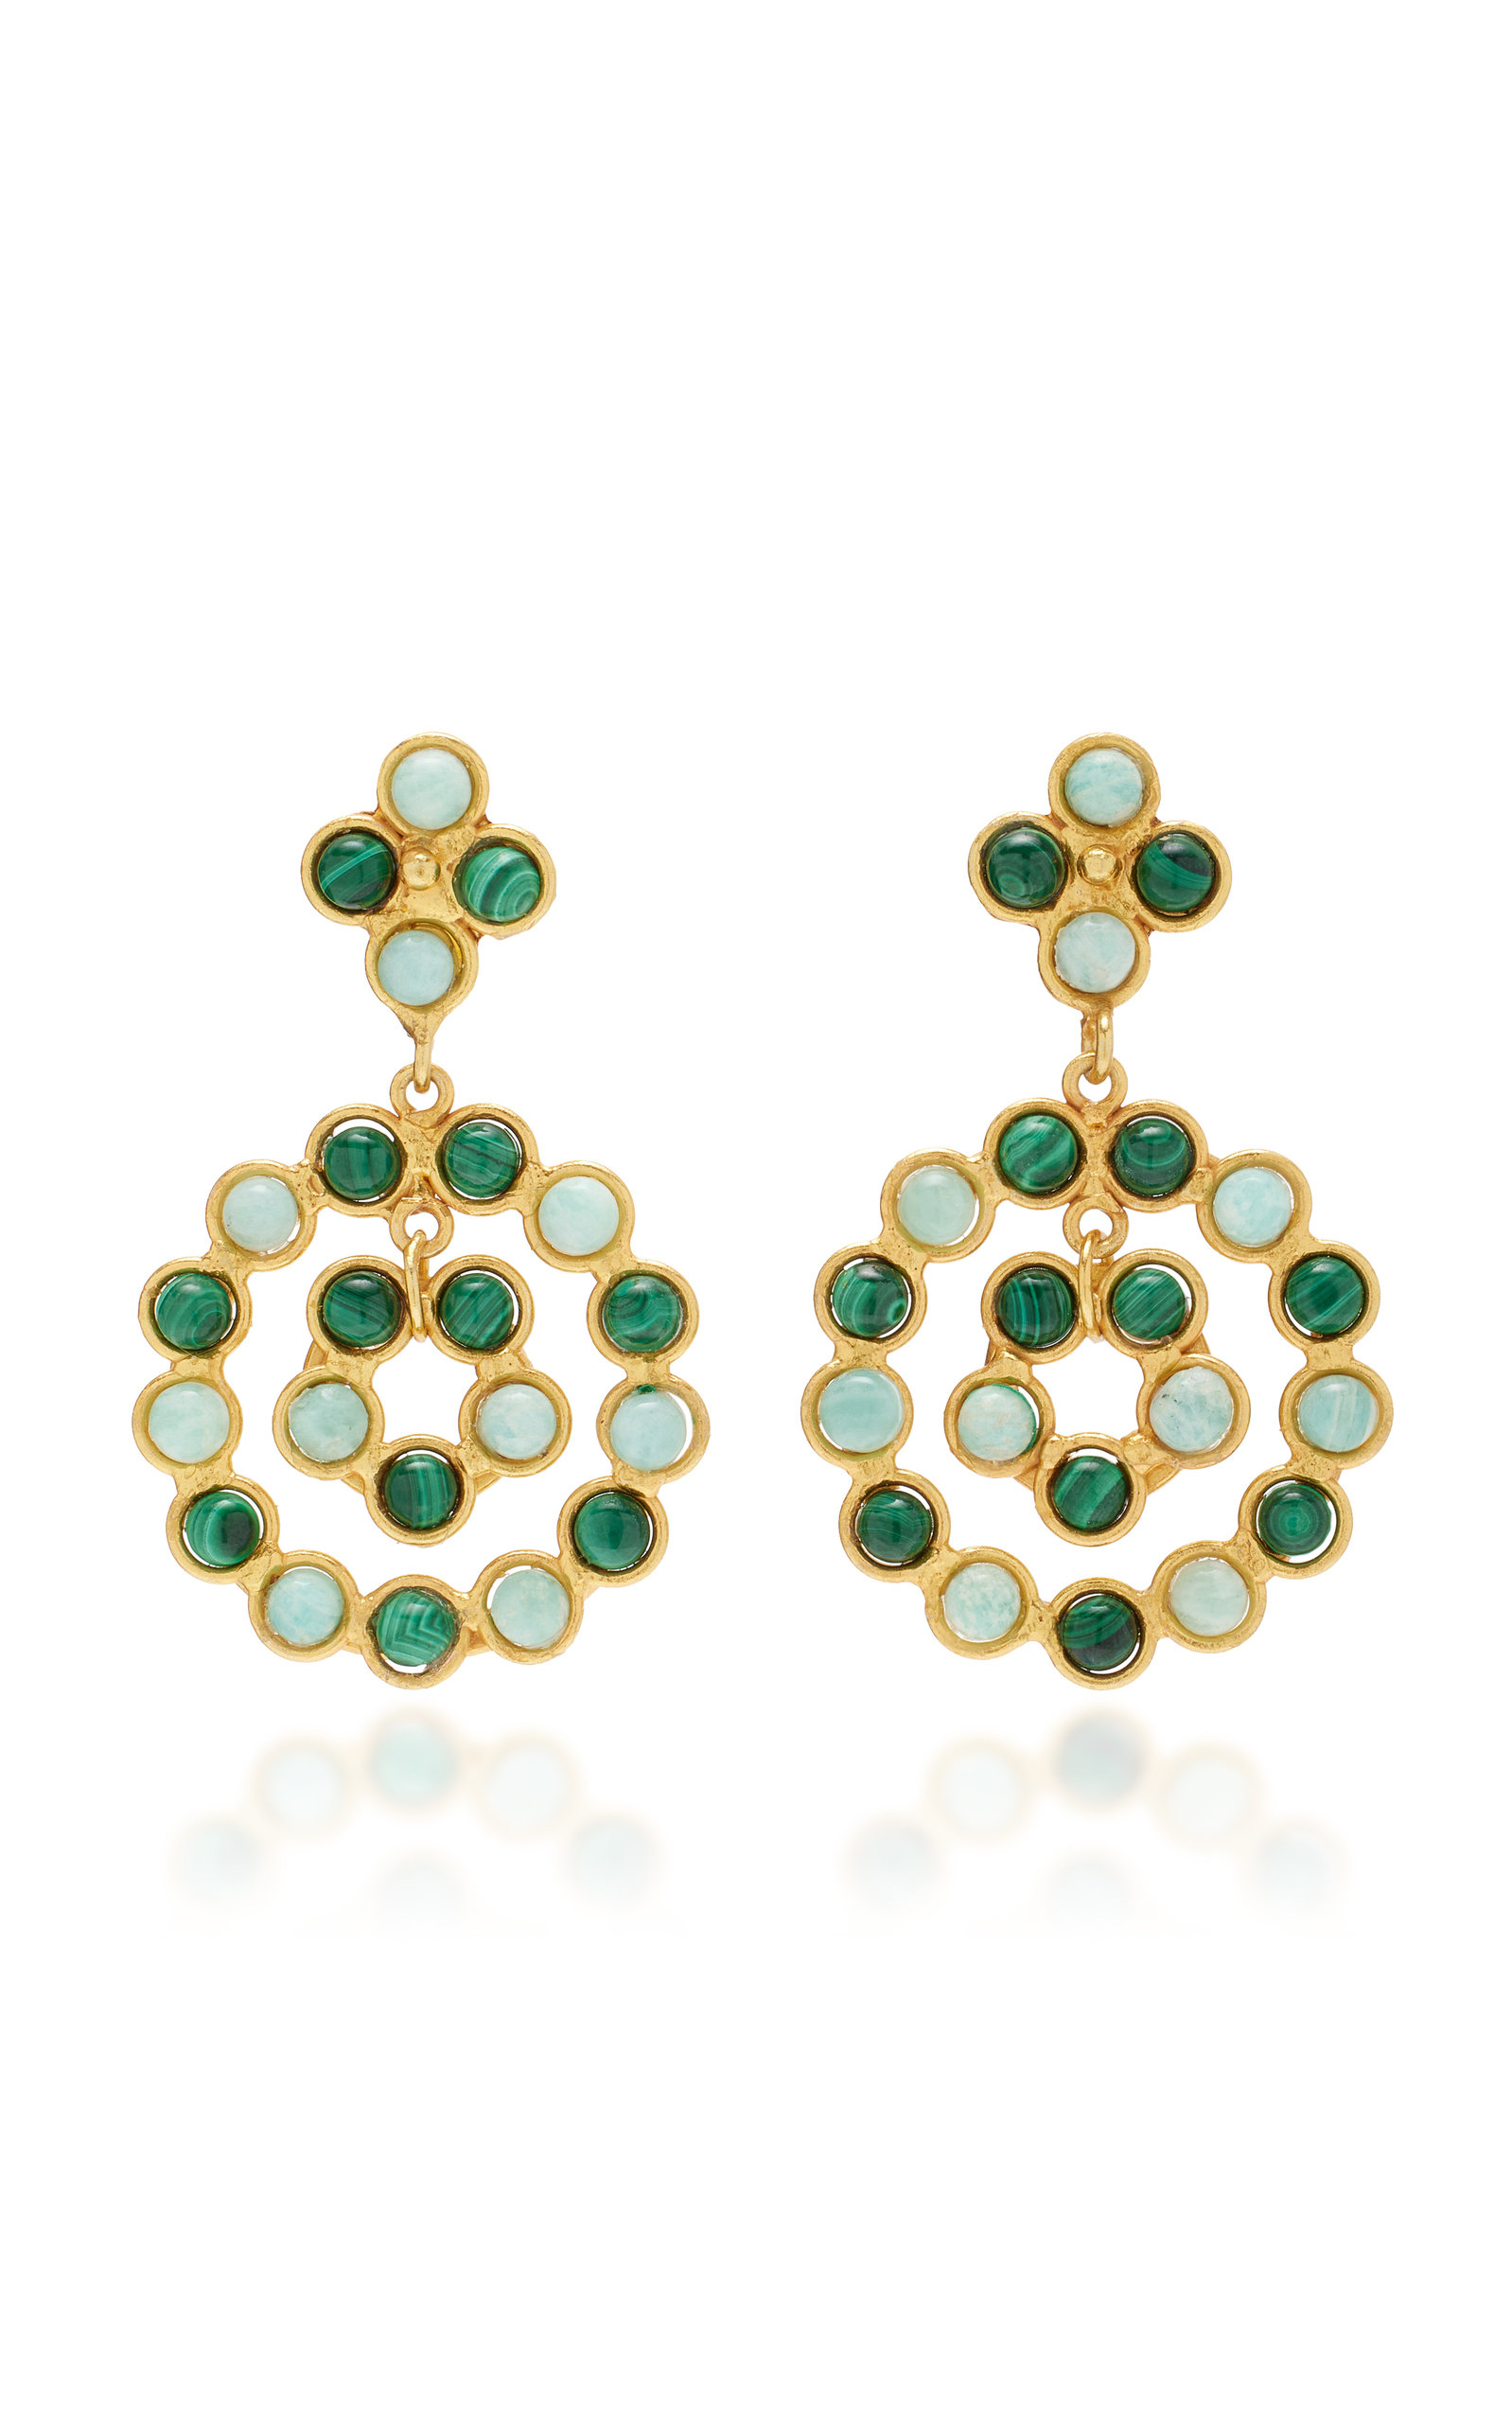 Flower Candies 22K Gold-Plated Malachite and Amazonite Earrings